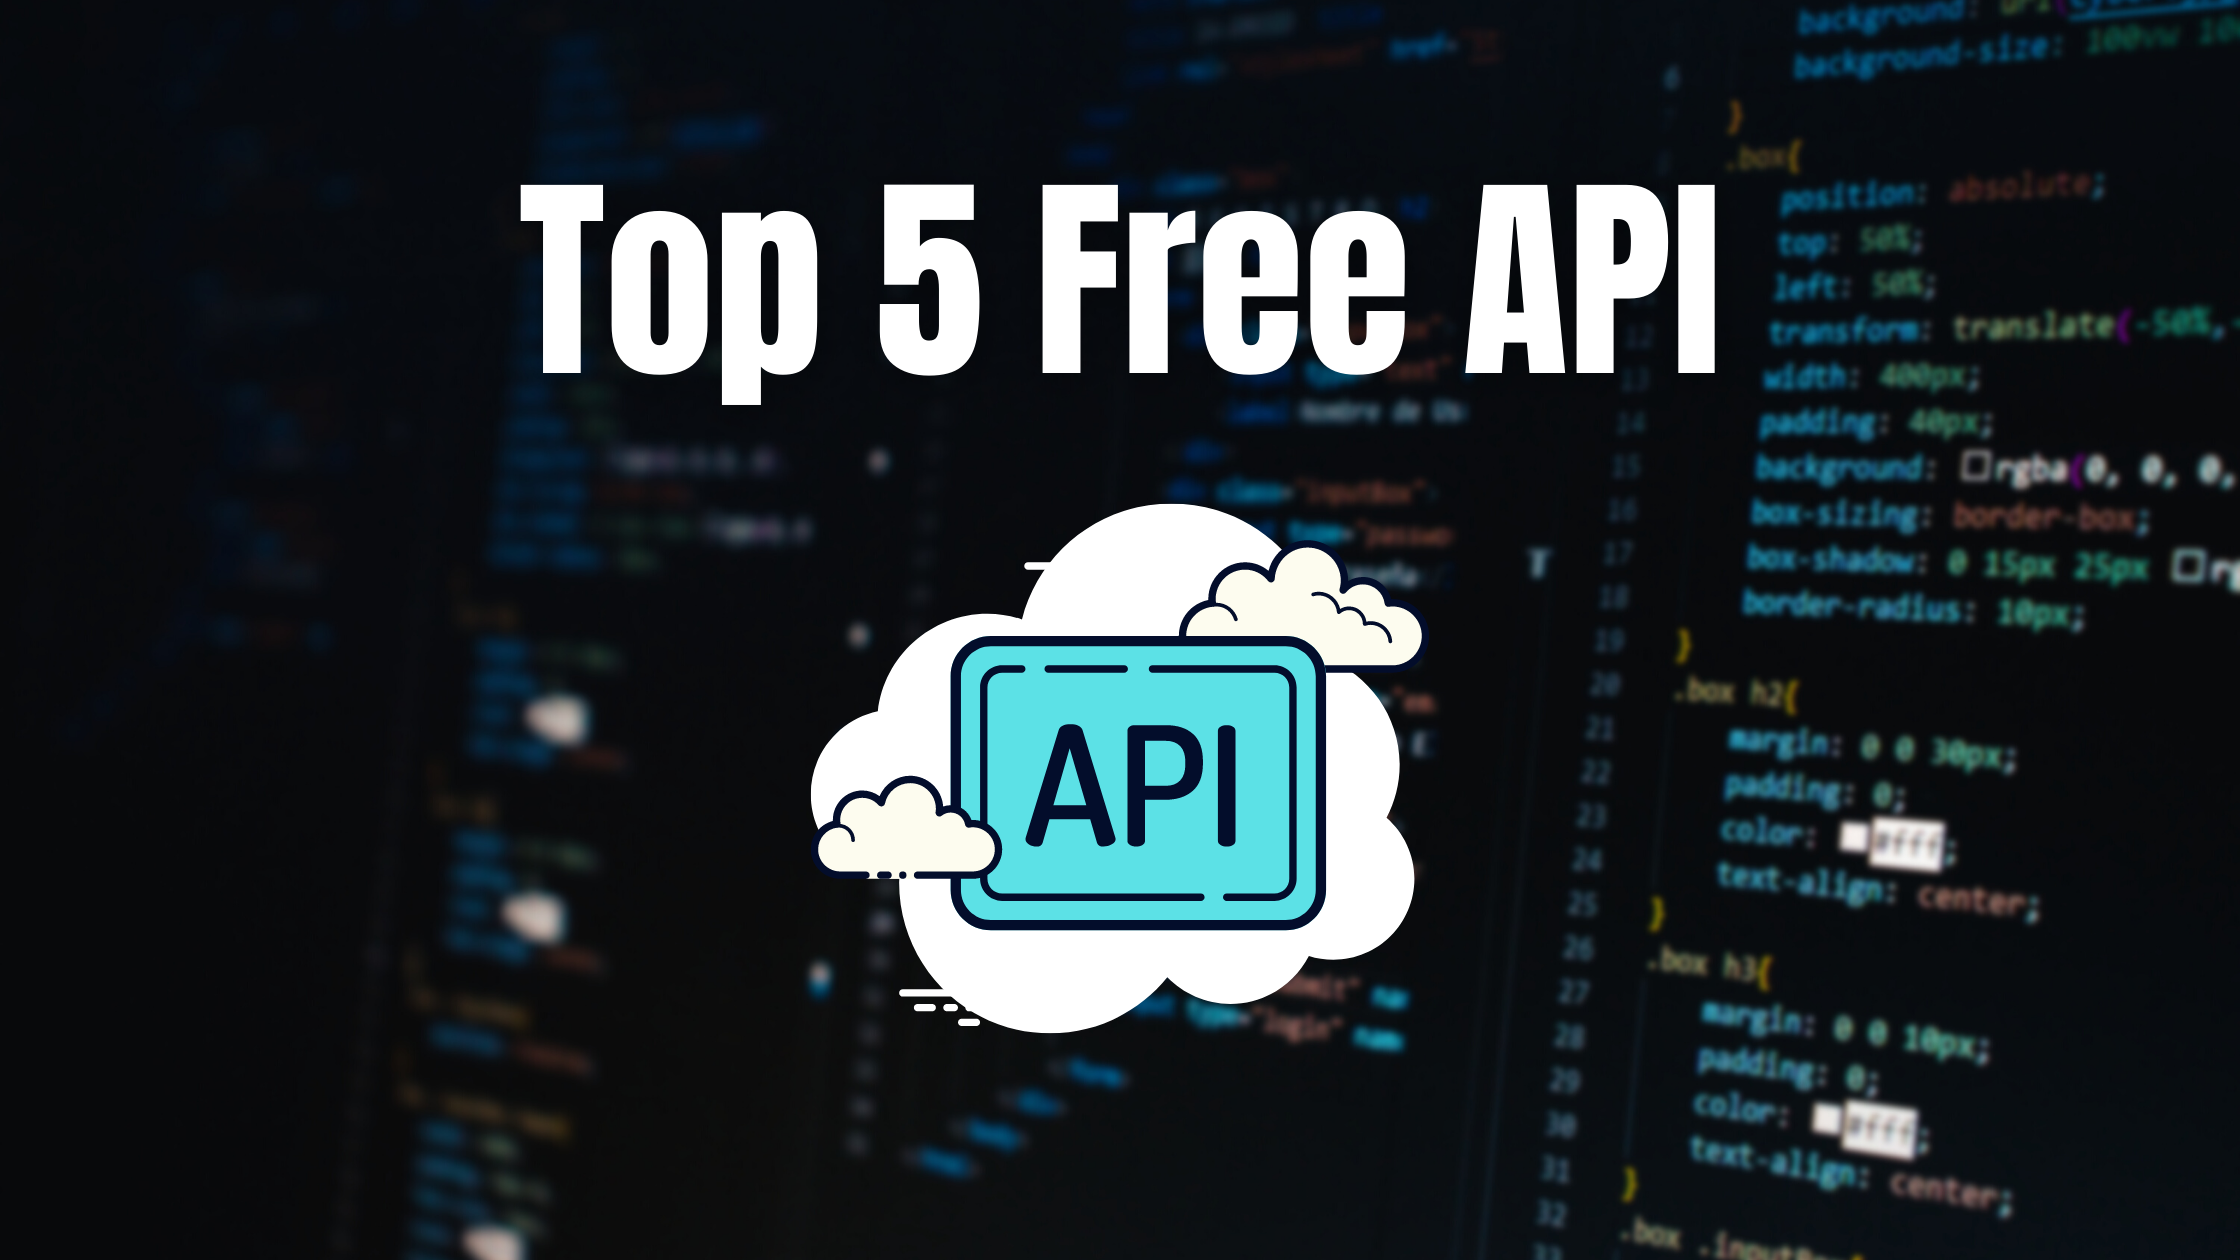 You are currently viewing Top 5 Free API’s for Beginners